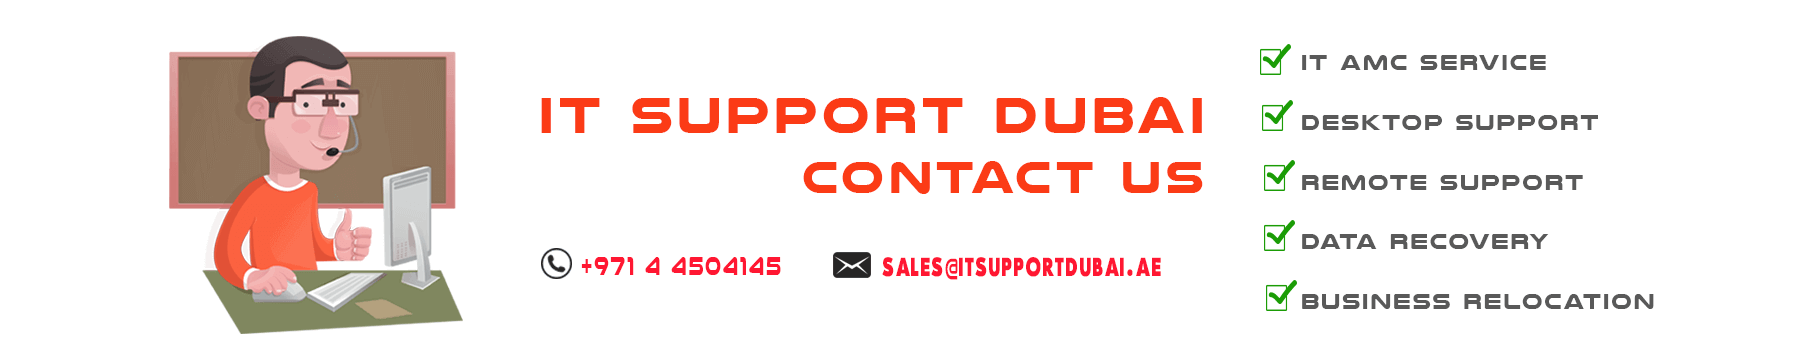 IT-Support-Dubai-Contact-Us